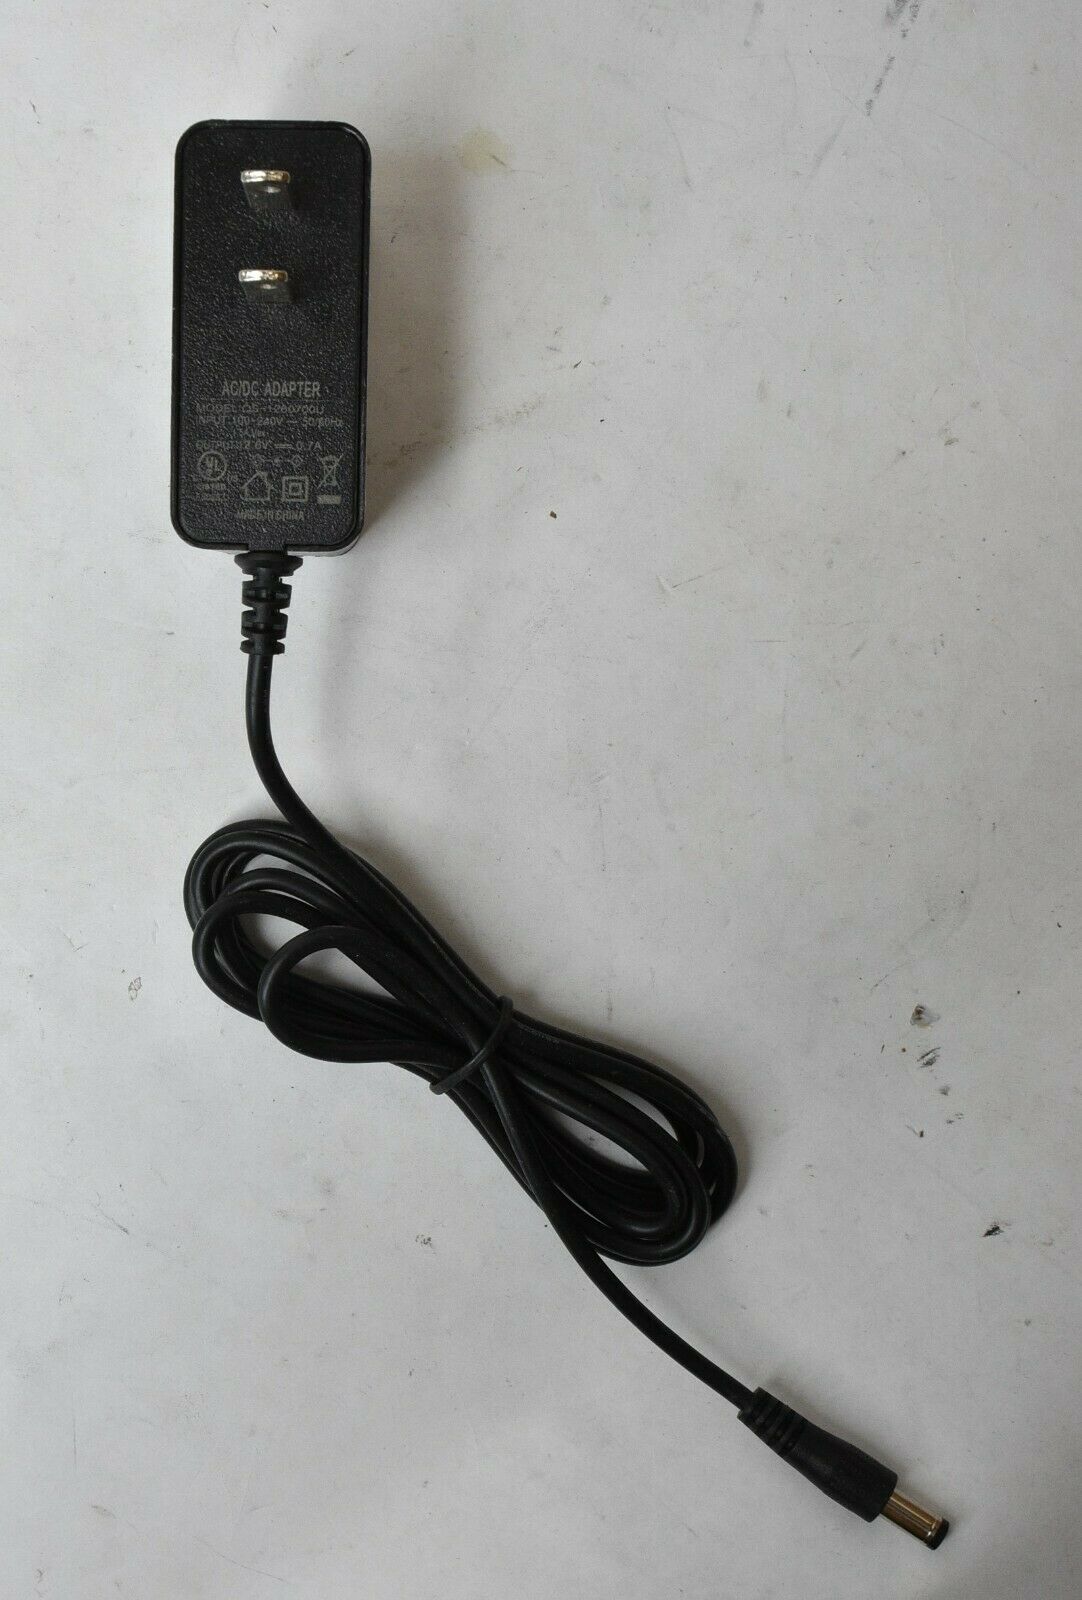 QS-1260700U AC/DC Adapter Power Supply Unit 12.6V 0.7A Type: AC/DC Adapter Output Voltage: 12.6 V Brand: Unbranded